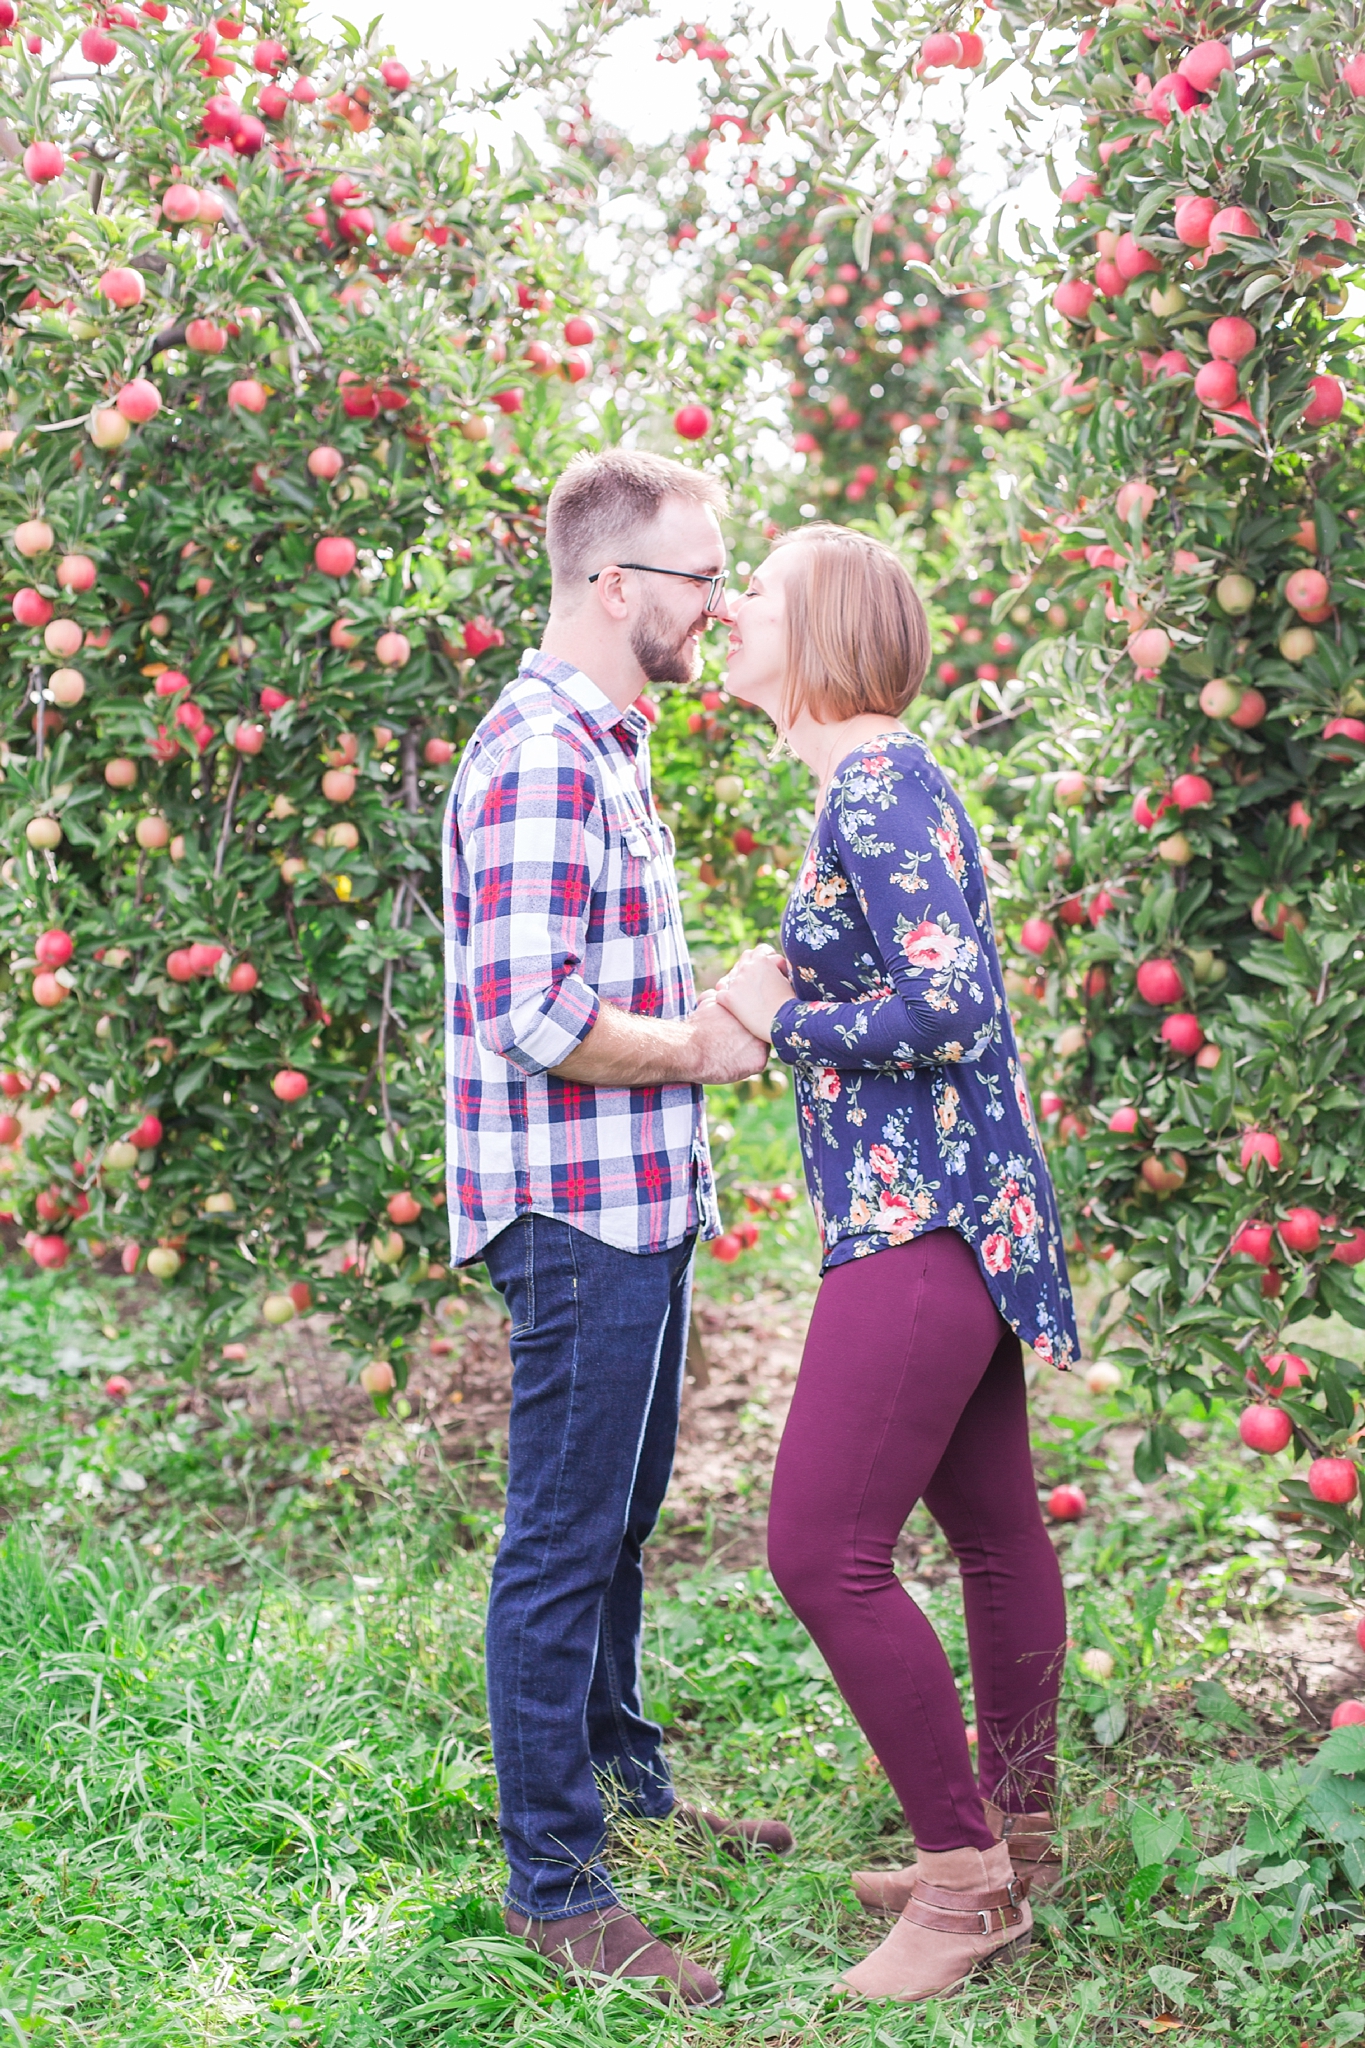 playful-fall-engagement-photos-at-hy's-cider-mill-ochard-in-bruce-township-michigan-by-courtney-carolyn-photography_0023.jpg